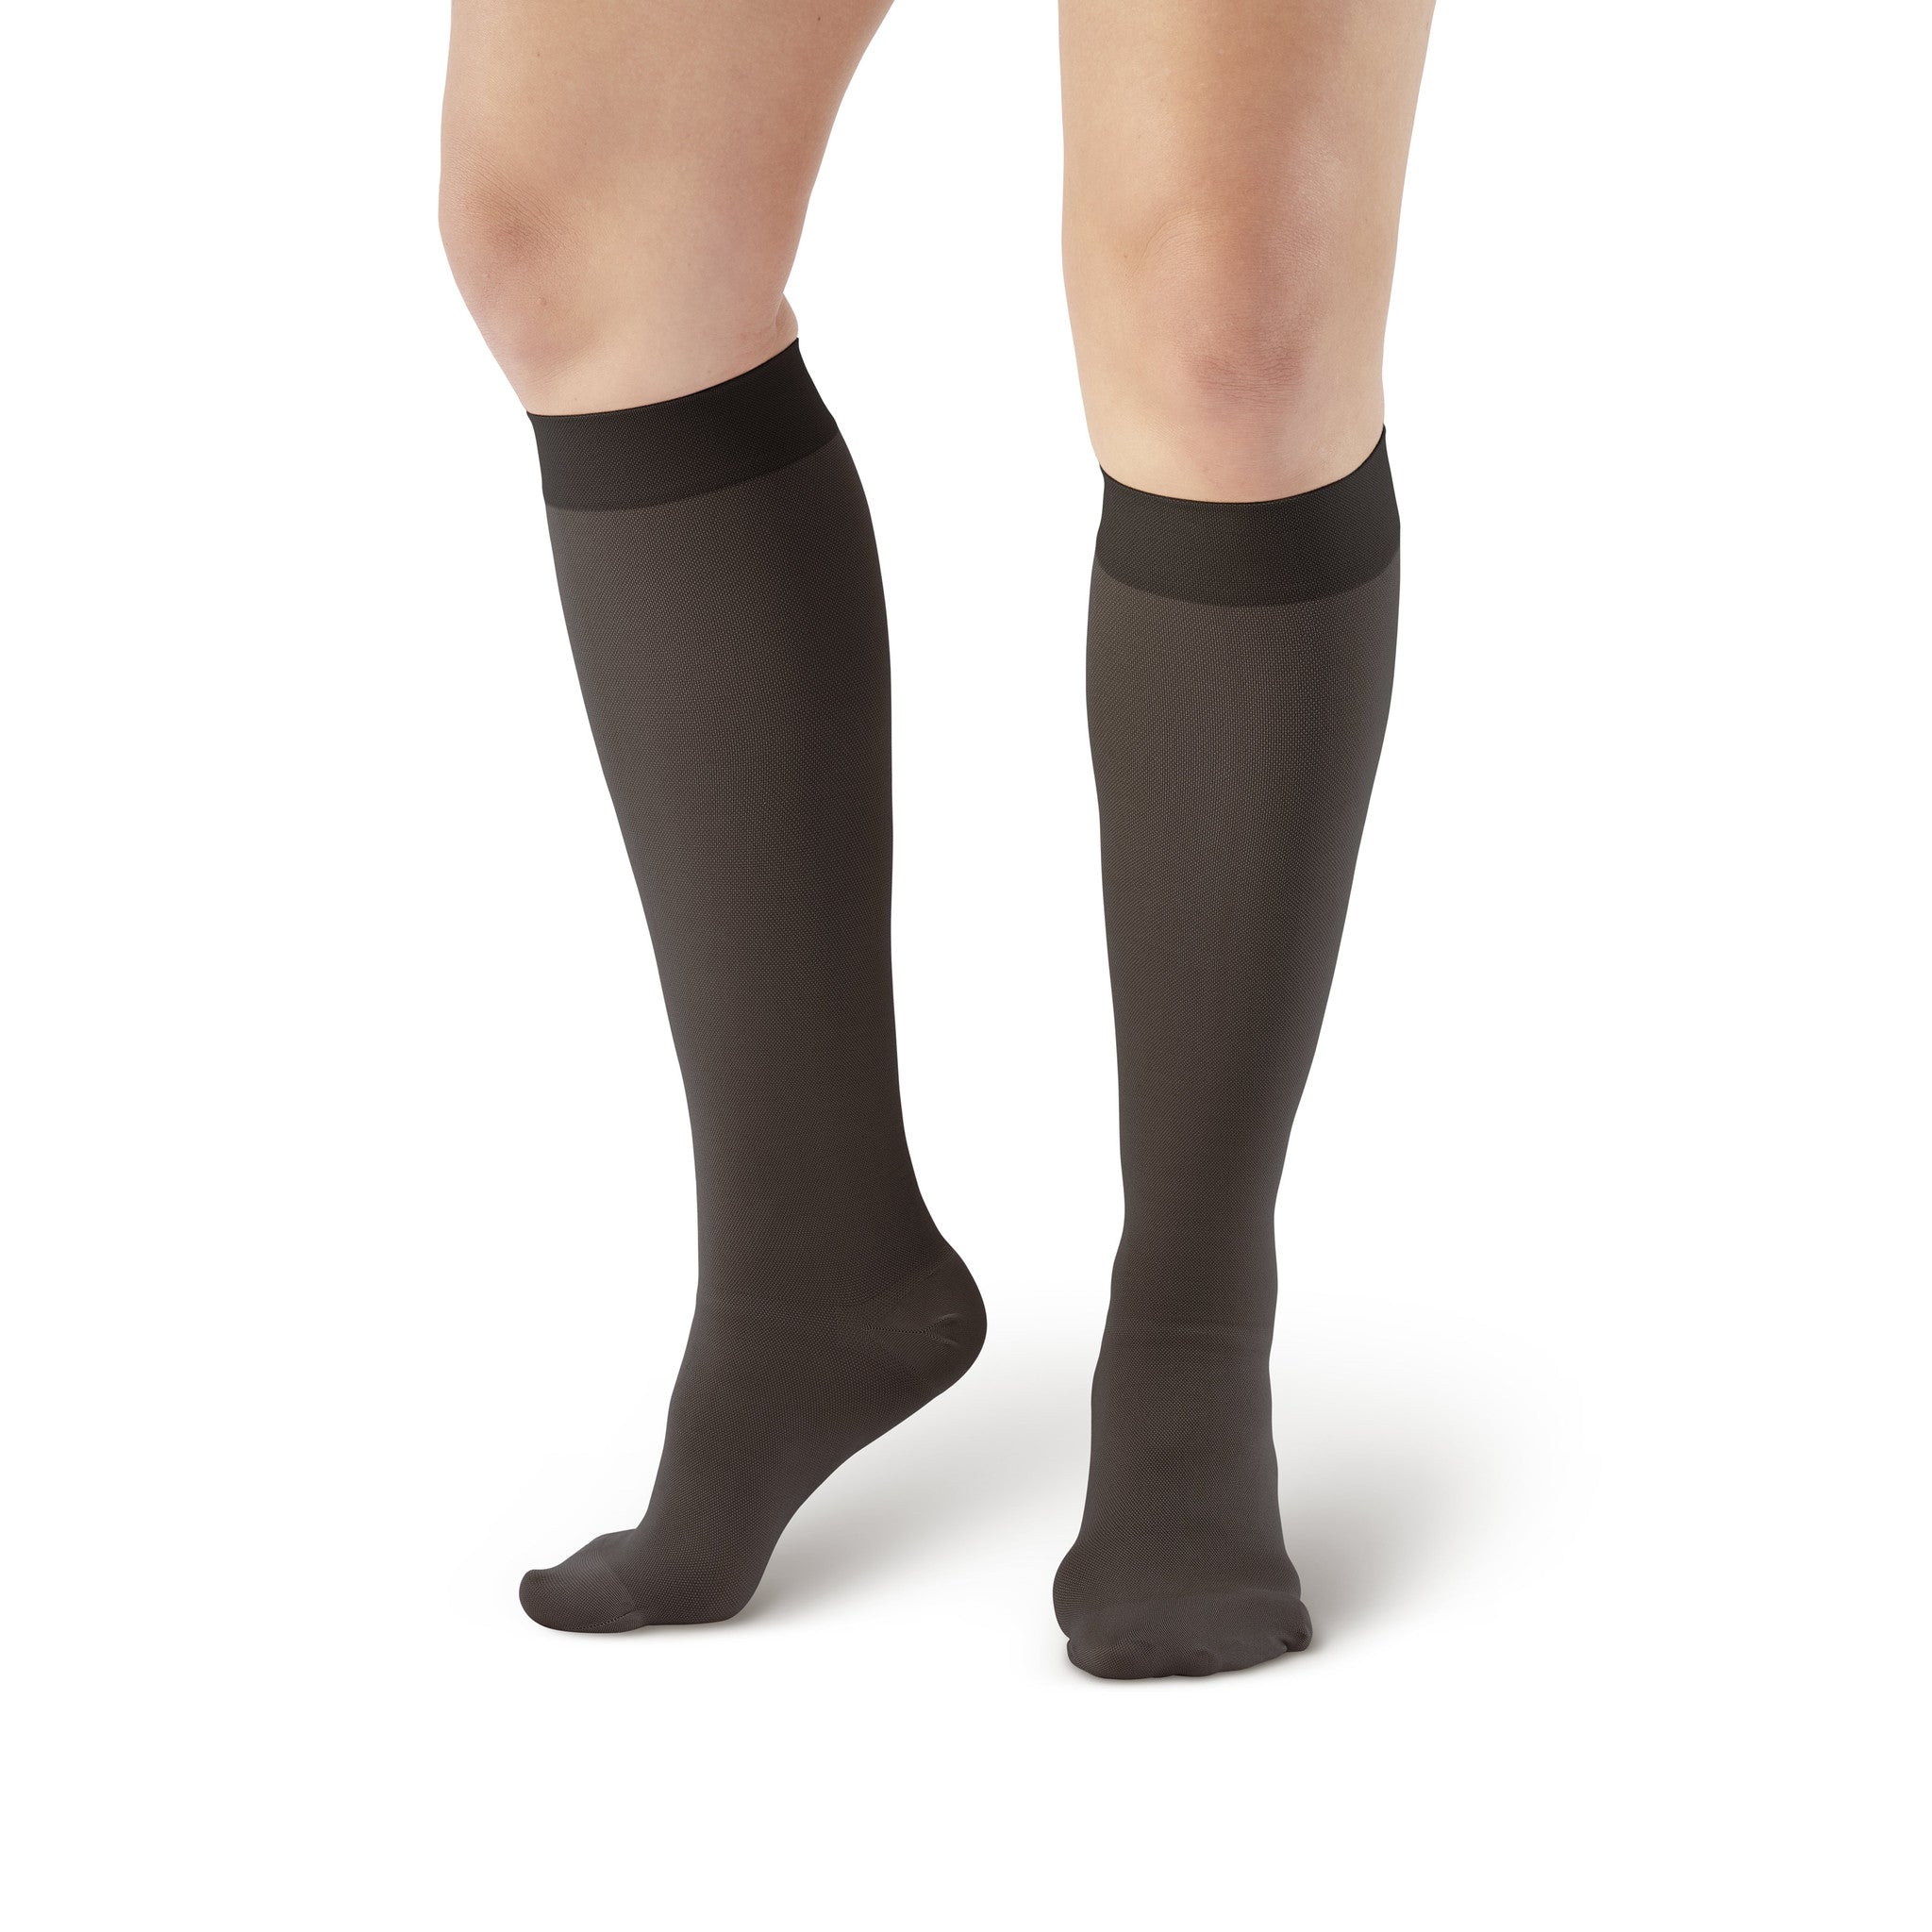 AW Style 200 Medical Support Closed Toe Knee Highs